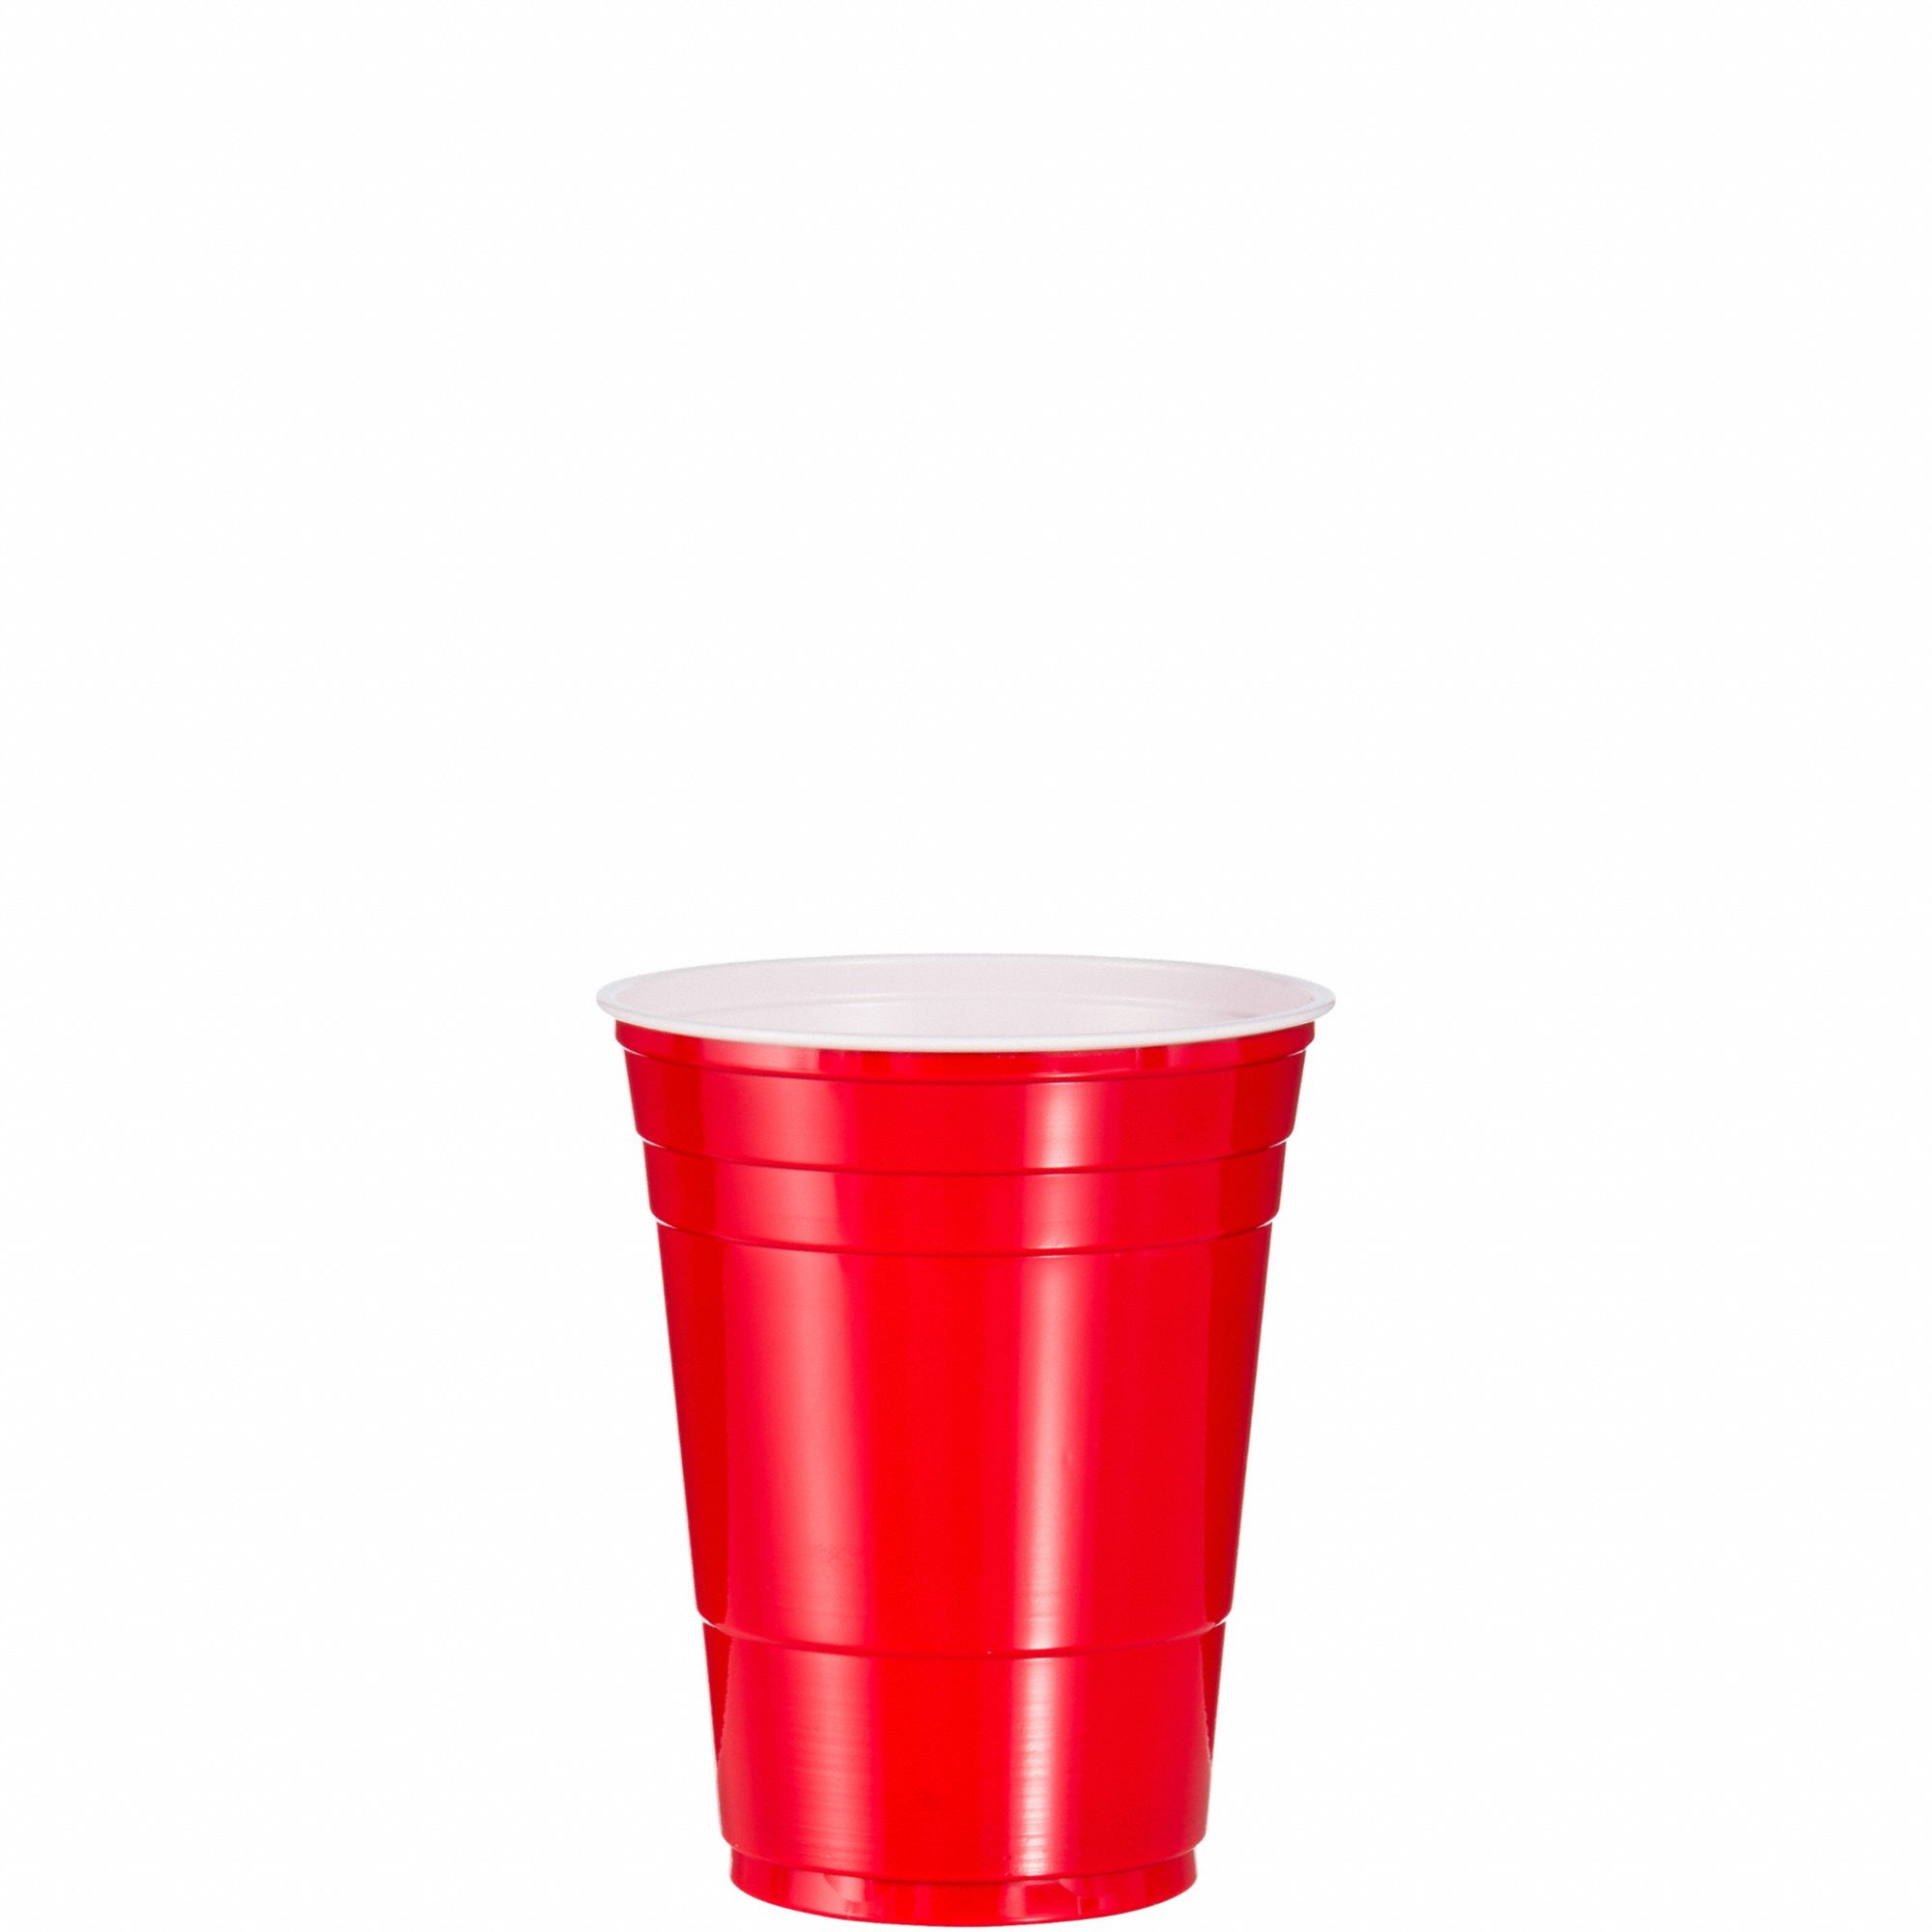 Disposable Cold Cup: 16 oz Capacity, Red, Plastic, Unwrapped, Patternless, 1,000 PK